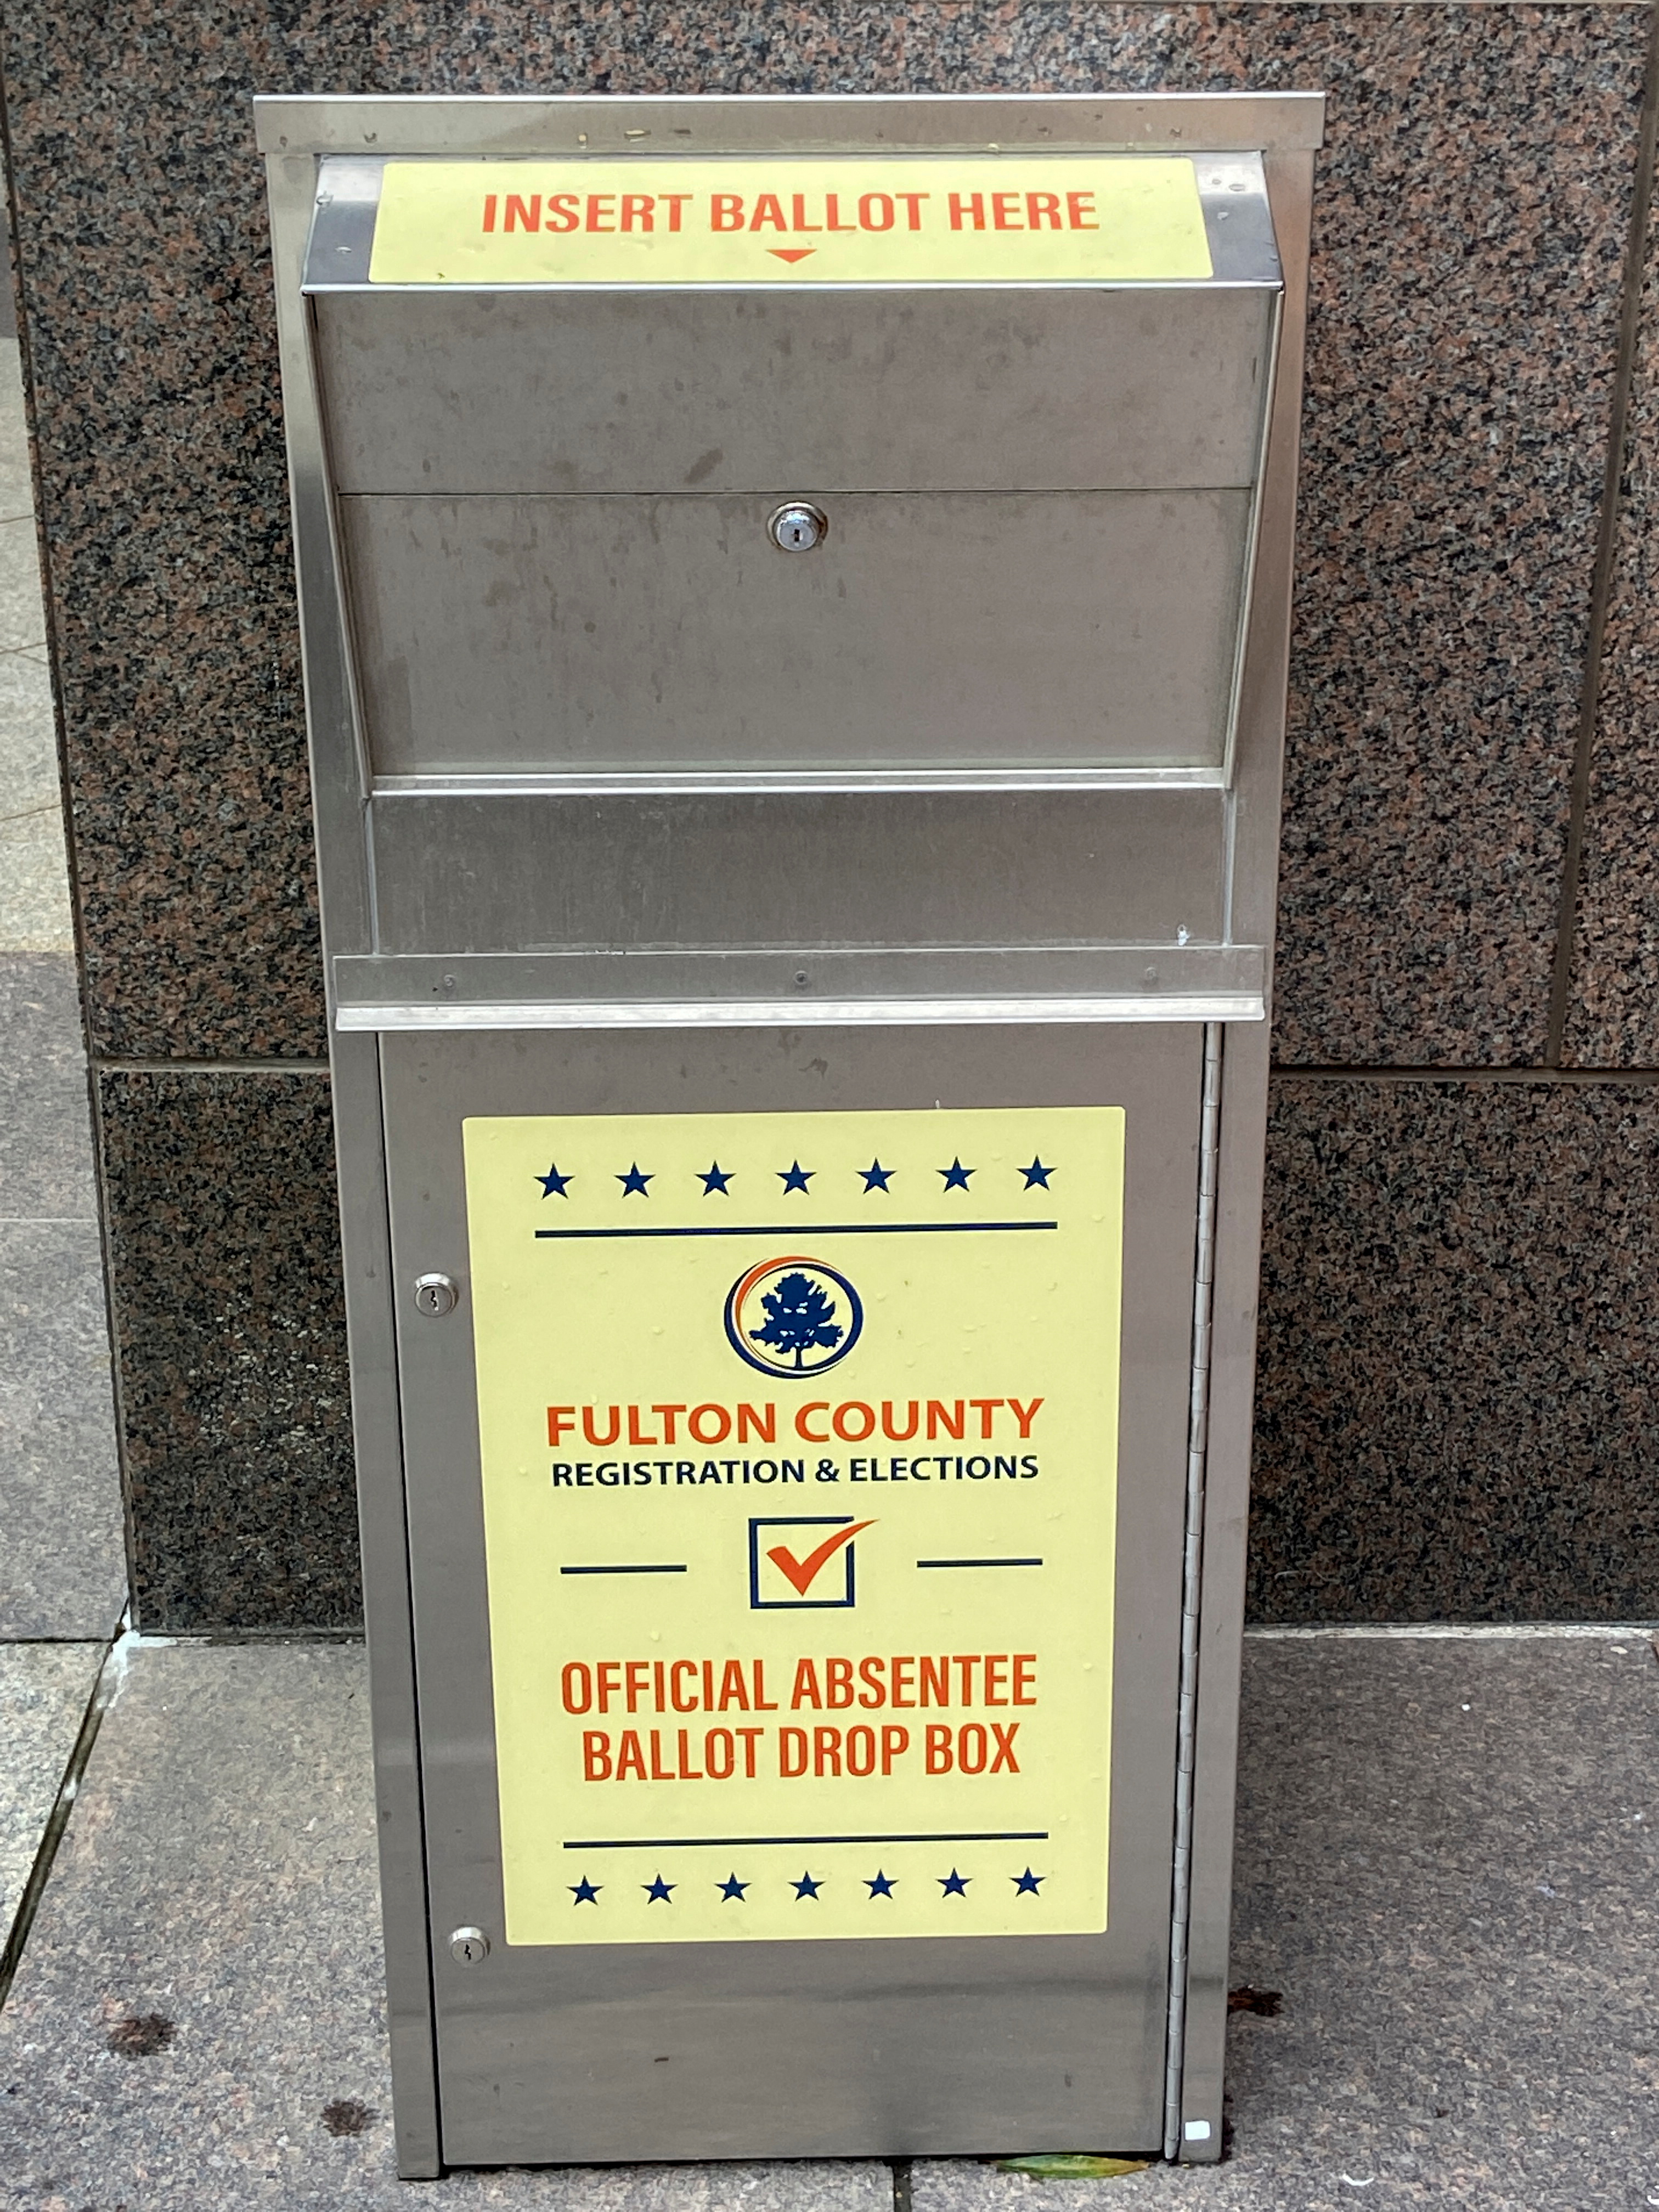 A Fulton County absentee ballot drop box is seen in Atlanta, Georgia, U.S., May 12, 2021. Picture taken May 12, 2021. REUTERS/Linda So/File Photo